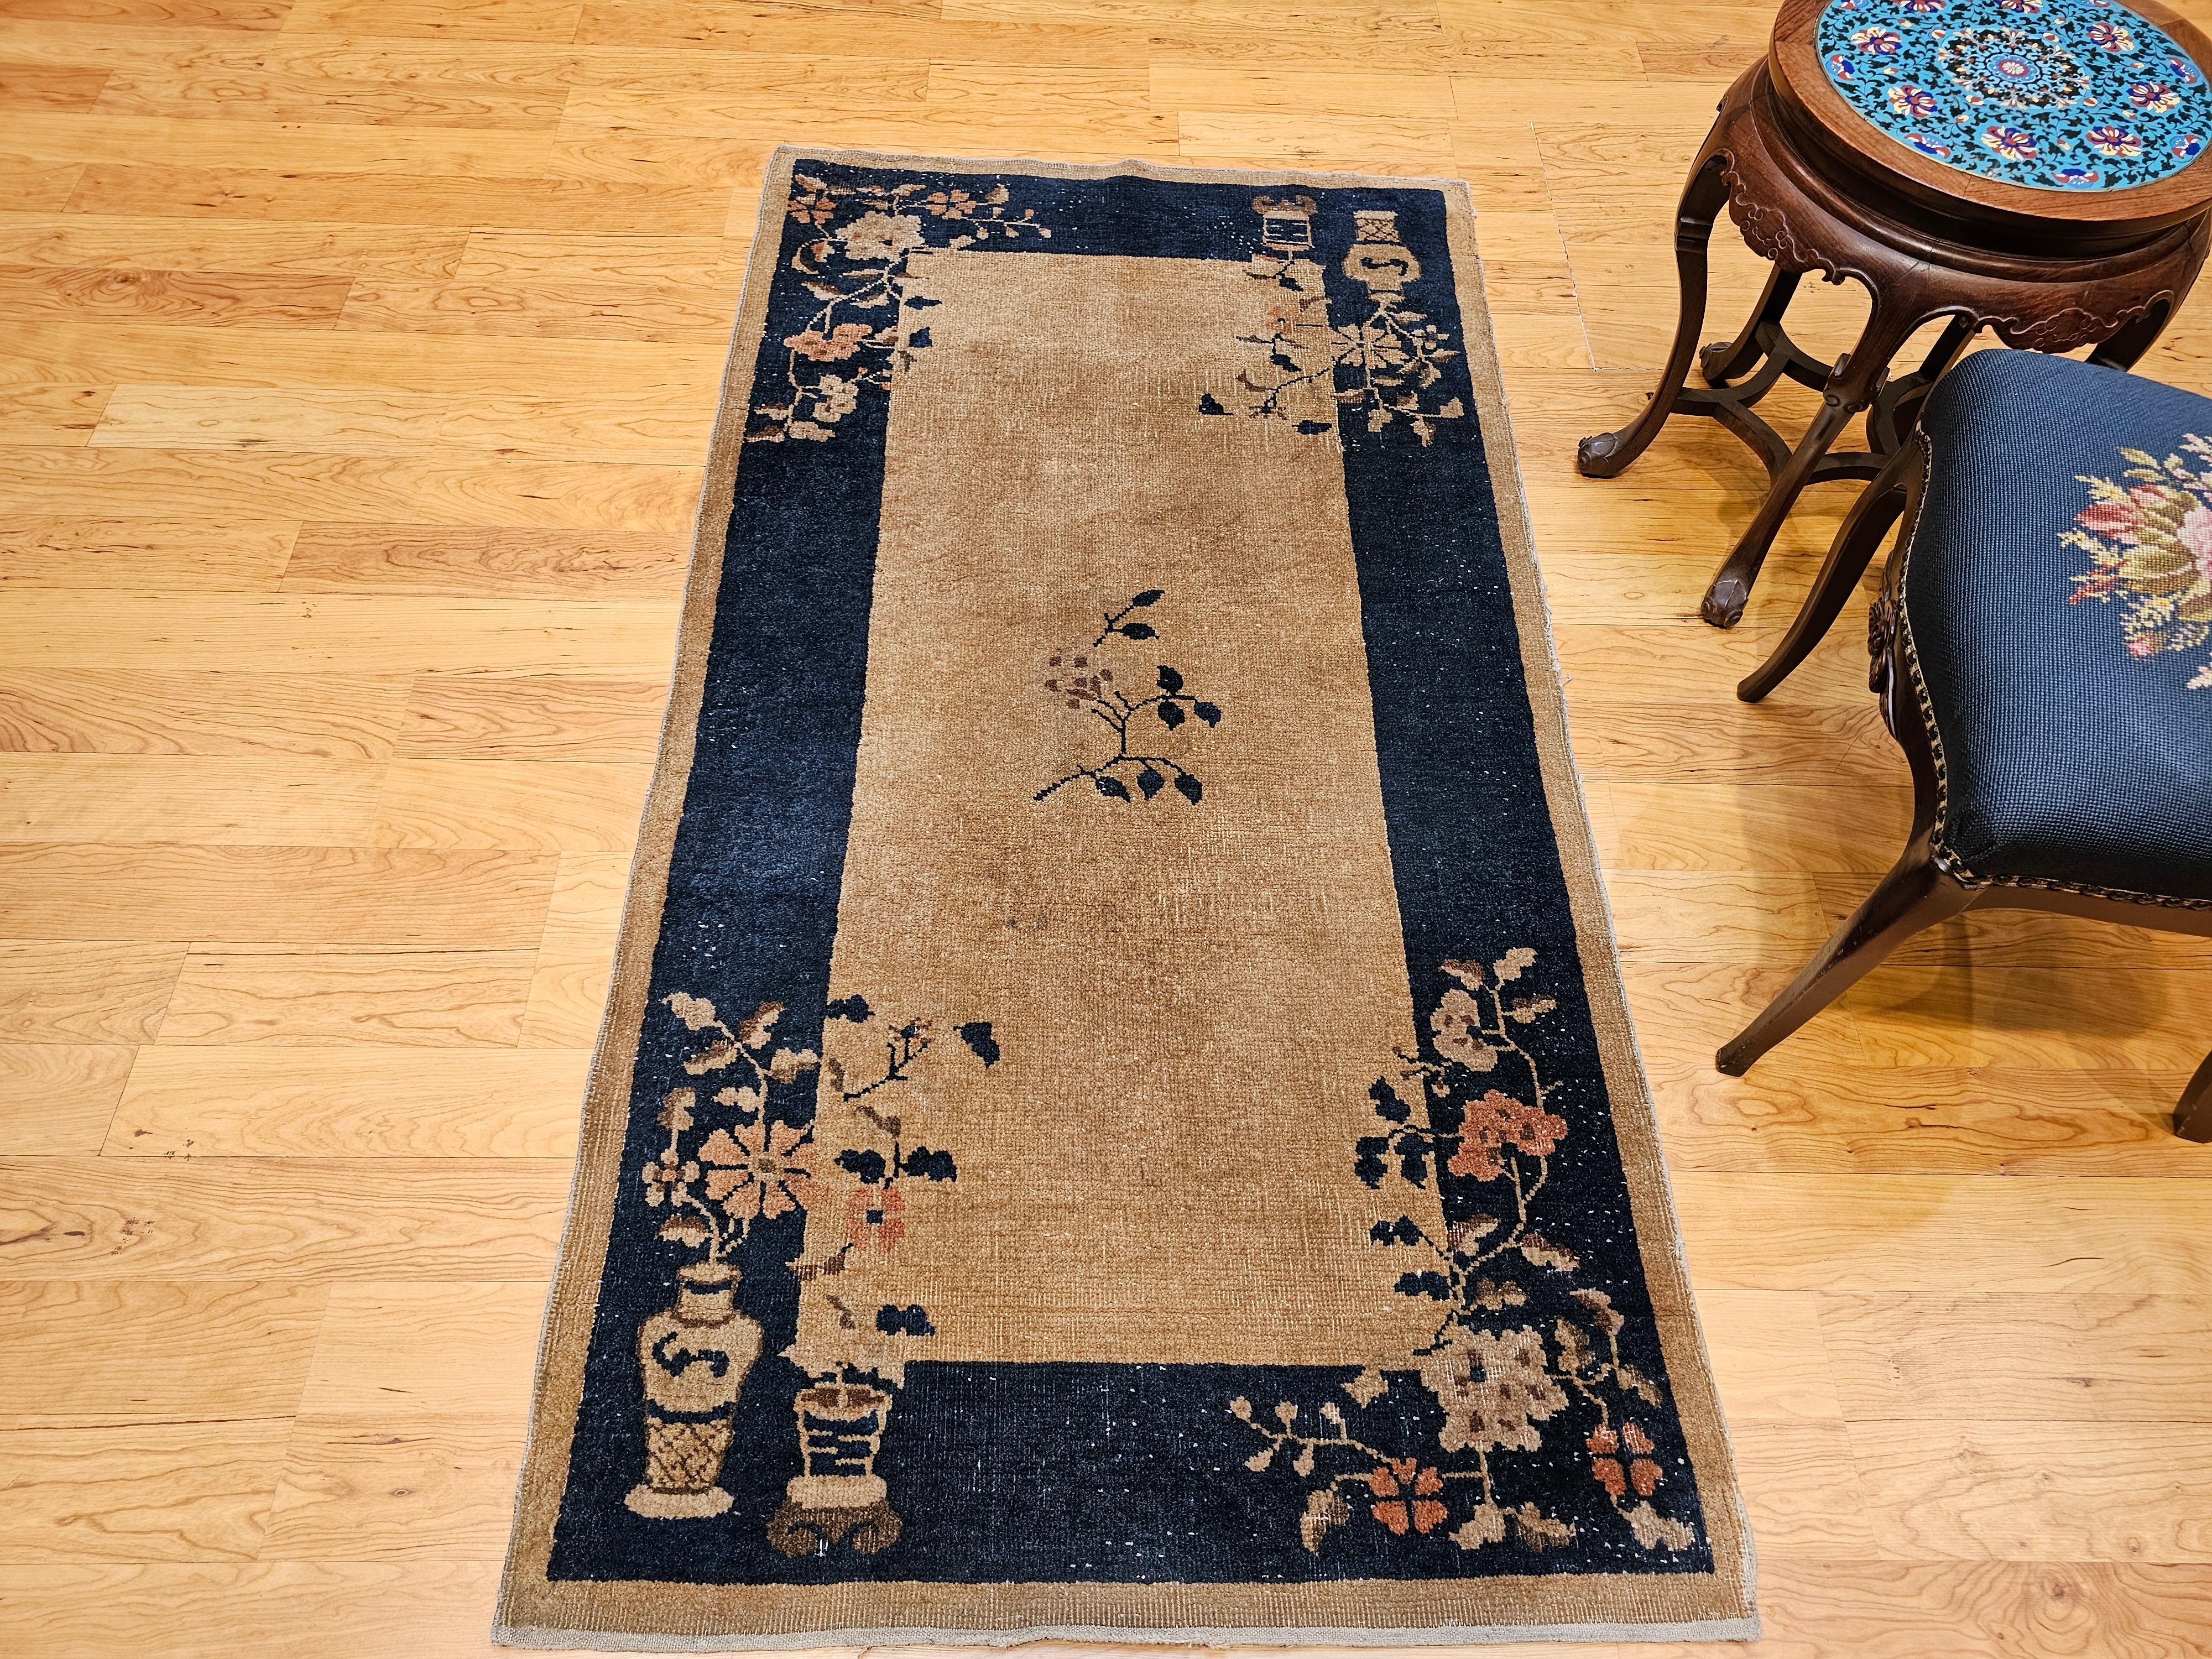 Vintage Art Deco Chinese Area Rug in Tan, Navy Blue, Brown, Pink, Red For Sale 5